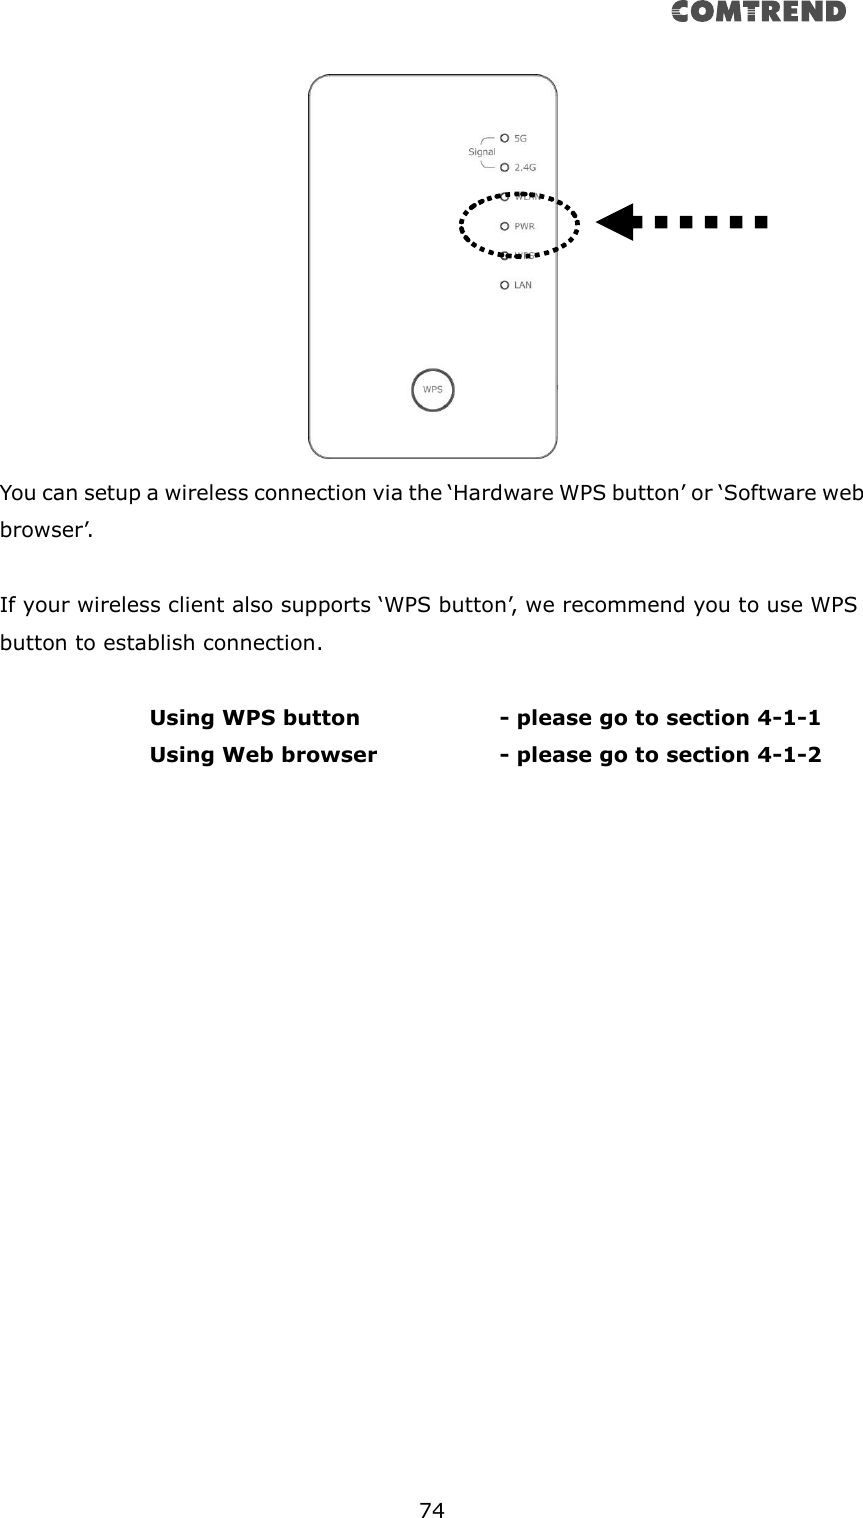       74   You can setup a wireless connection via the ‘Hardware WPS button’ or ‘Software web browser’.  If your wireless client also supports ‘WPS button’, we recommend you to use WPS button to establish connection.  Using WPS button      - please go to section 4-1-1       Using Web browser      - please go to section 4-1-2       